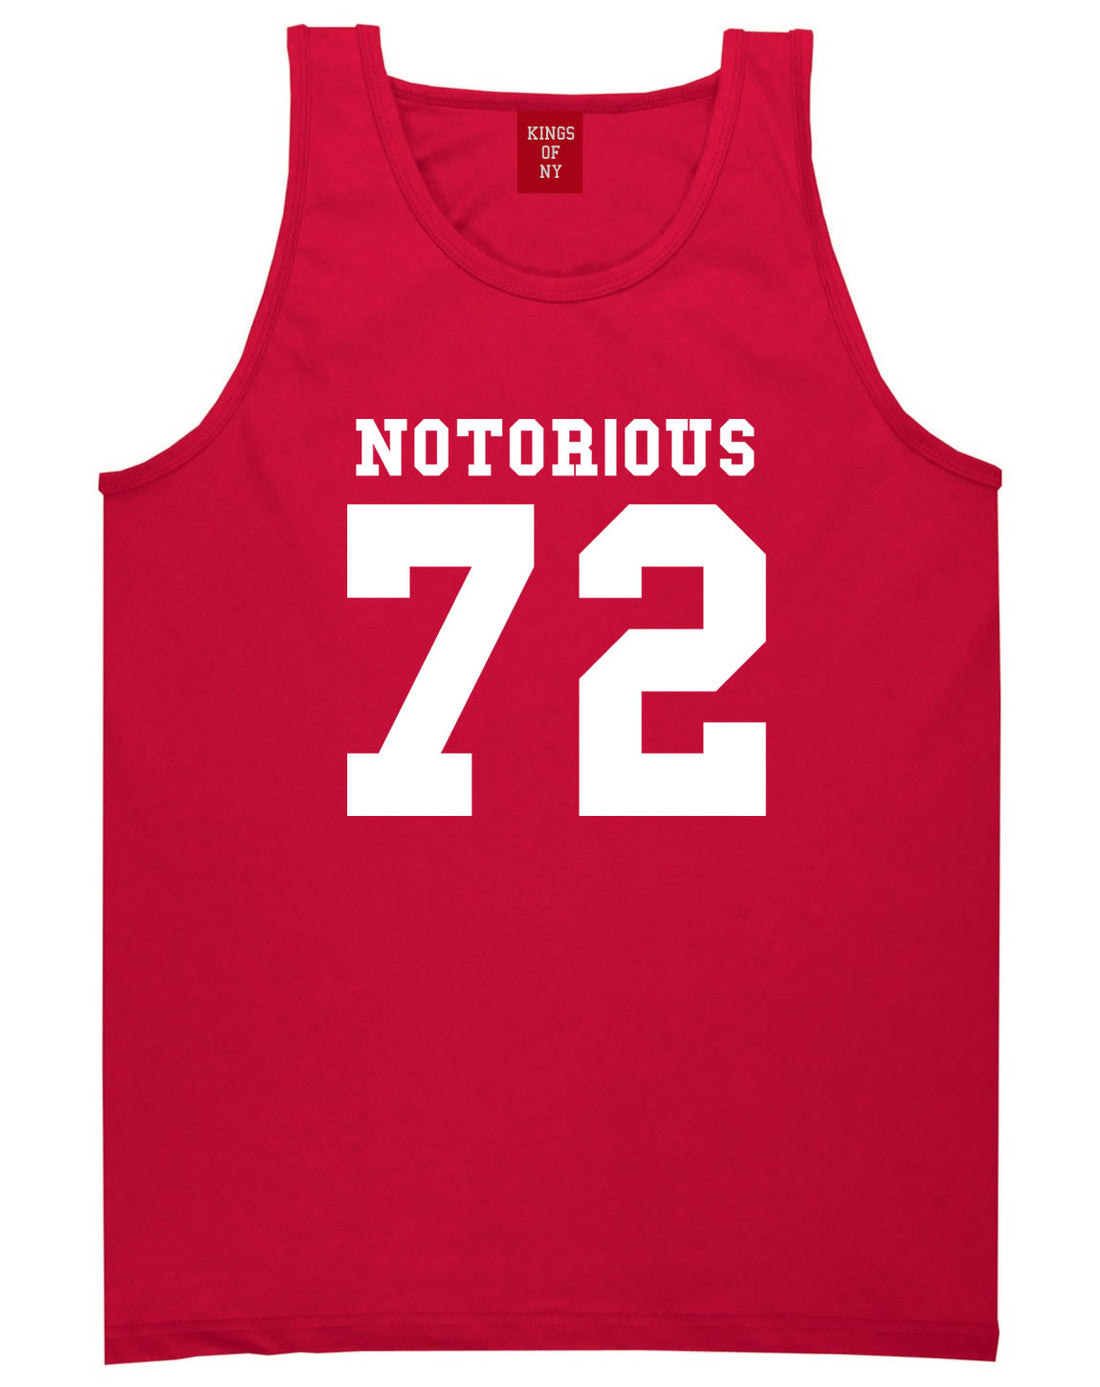 Notorious 72 Team Tank Top in Red by Kings Of NY